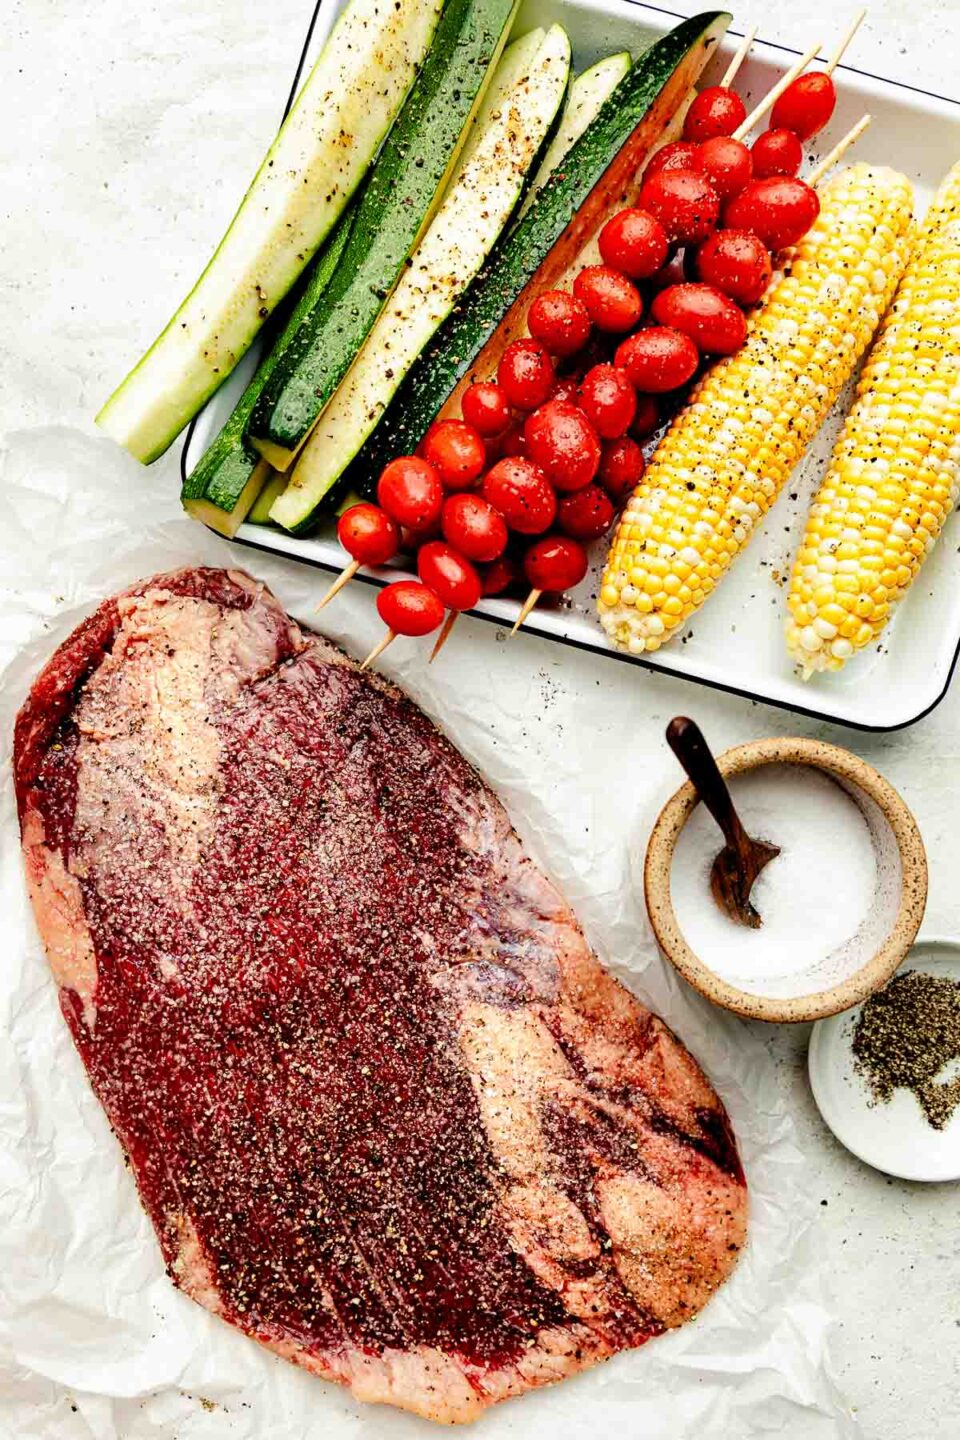 An overhead shot of prepared ingredients atop a white surface: seasoned flank steak, seasoned vegetables on a sheet pan, a jar of salt and bowl of pepper.